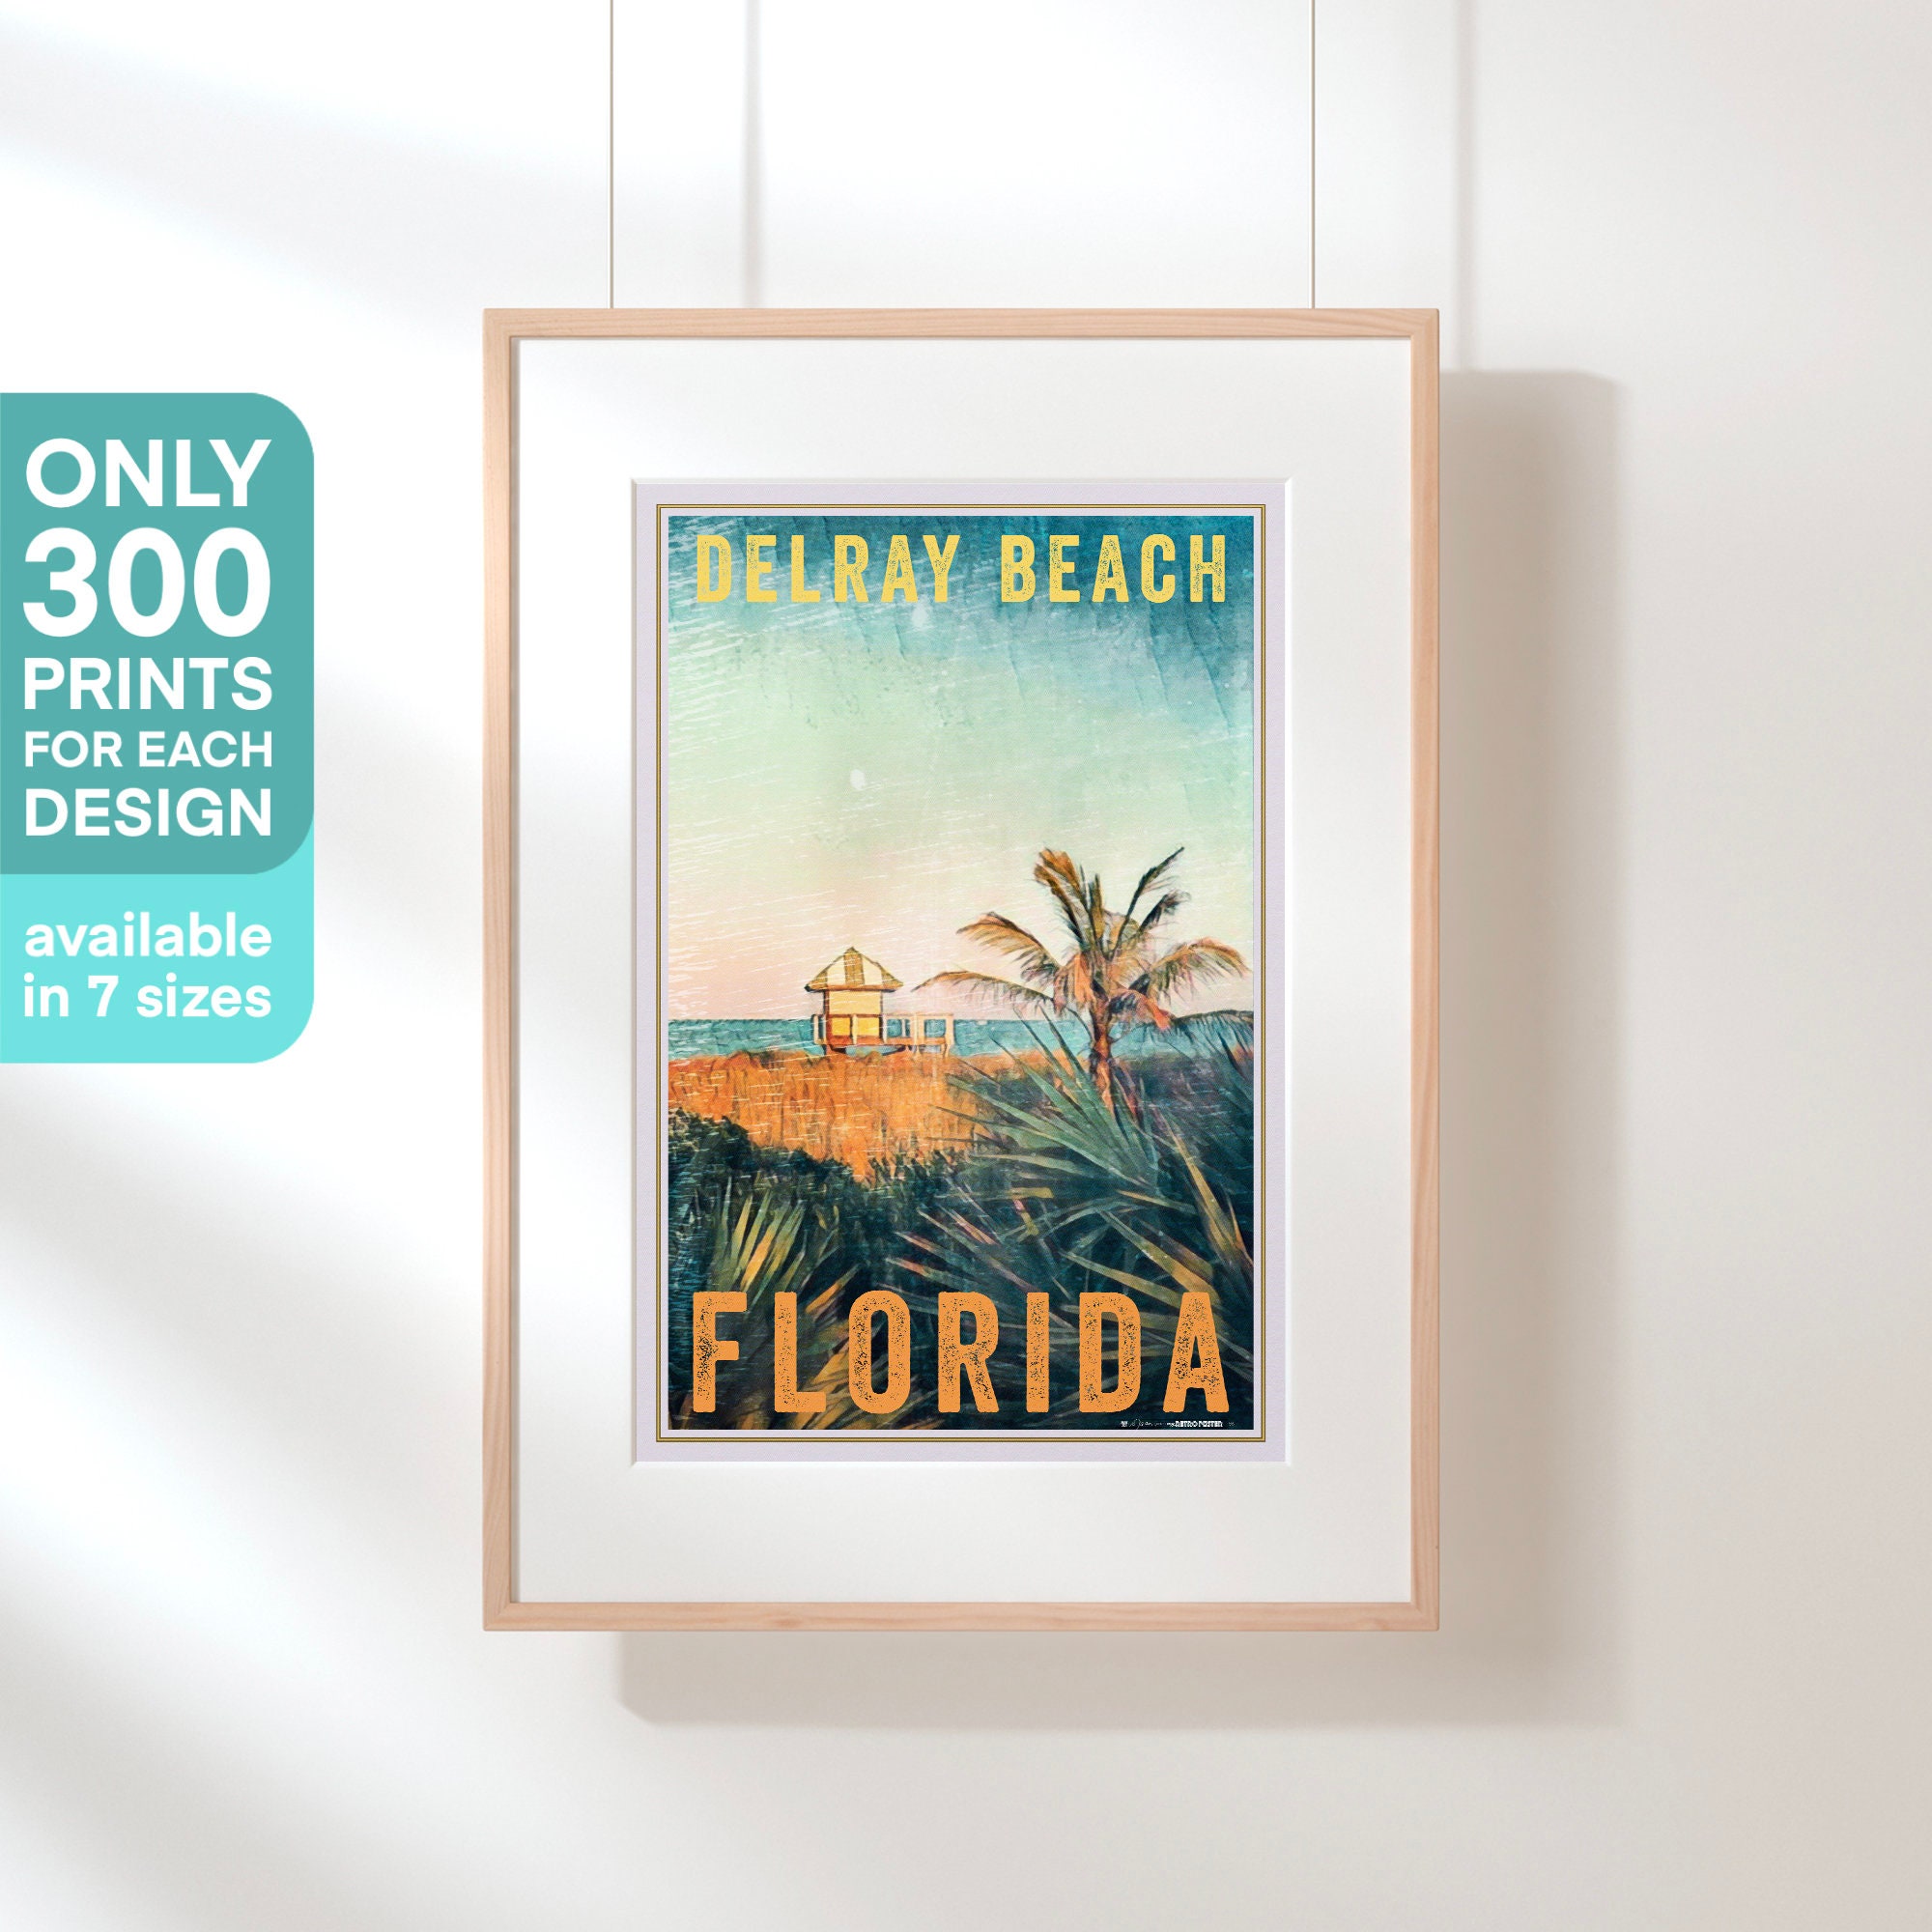 Florida Poster Delray Beach by Alecse Limited Edition pic